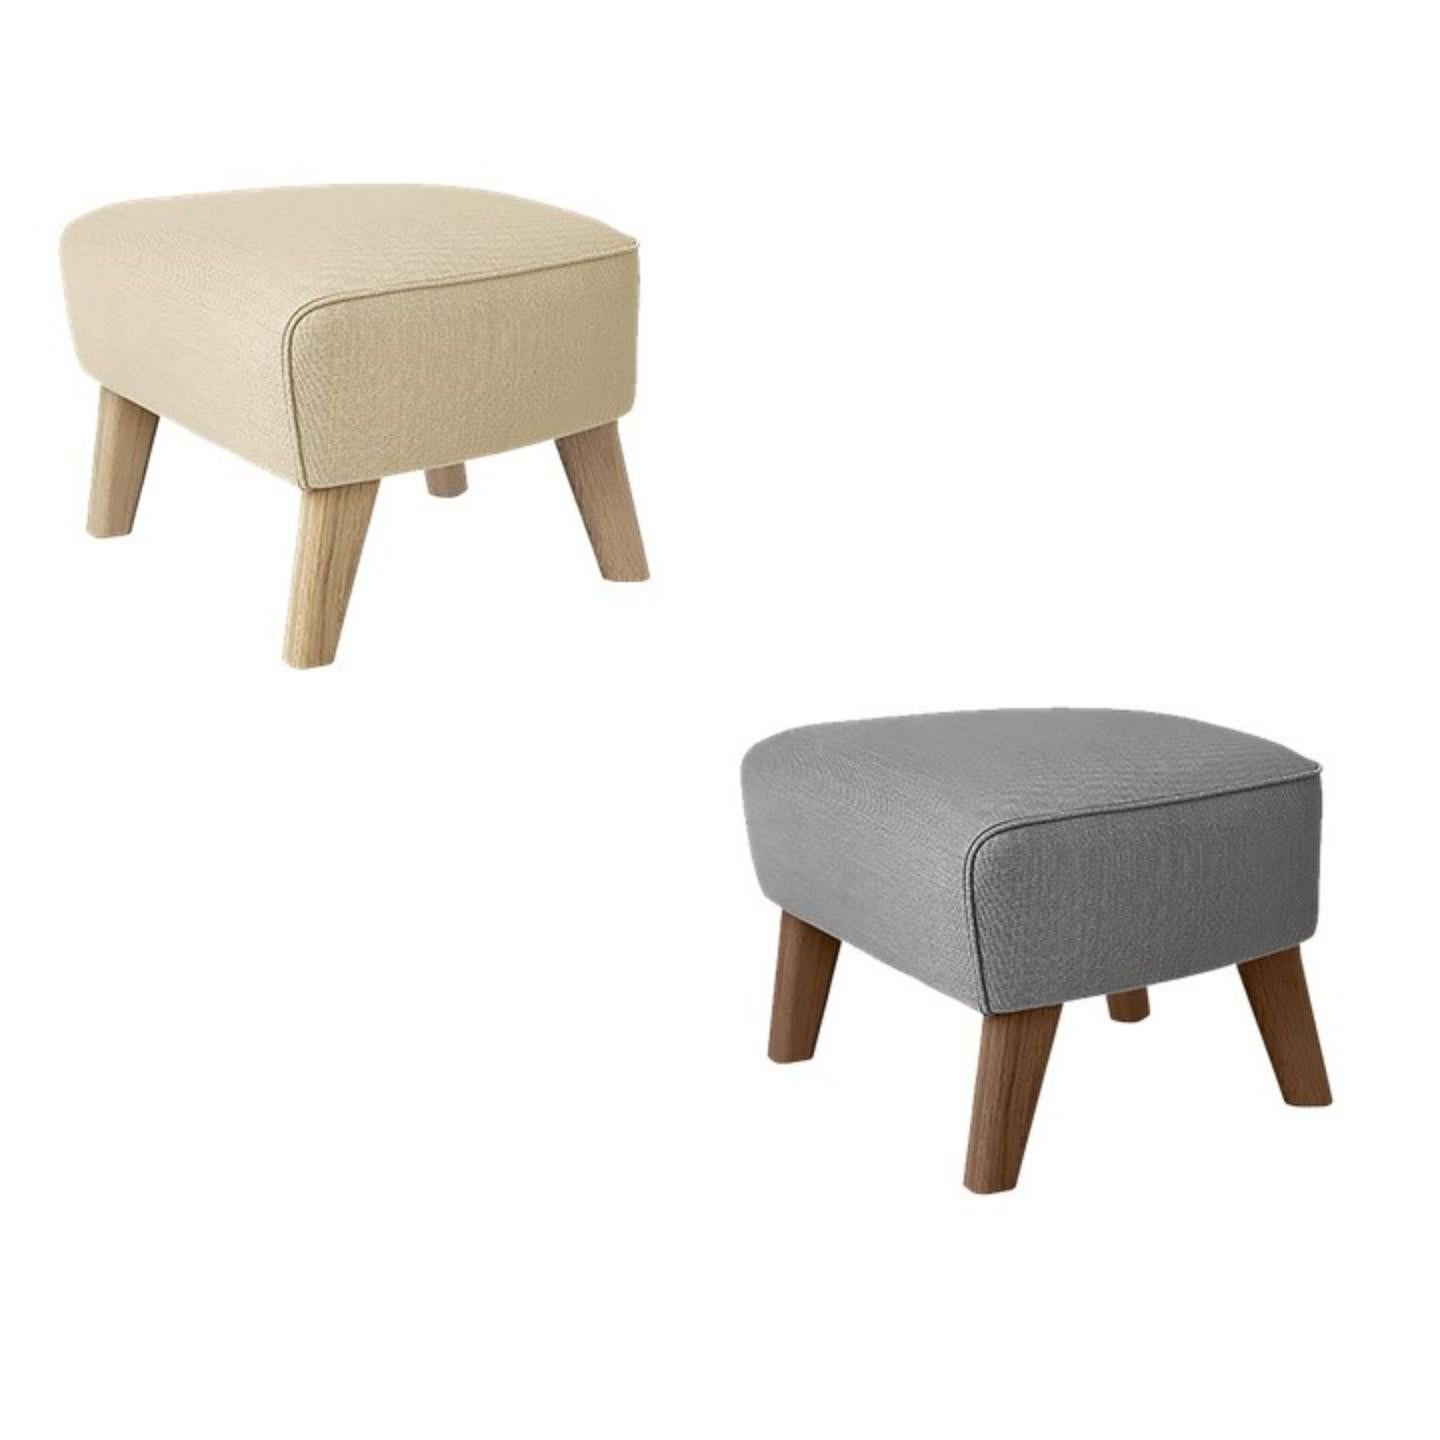 Other Set of 4 Blue and Natural Oak Sahco Zero Footstool by Lassen For Sale